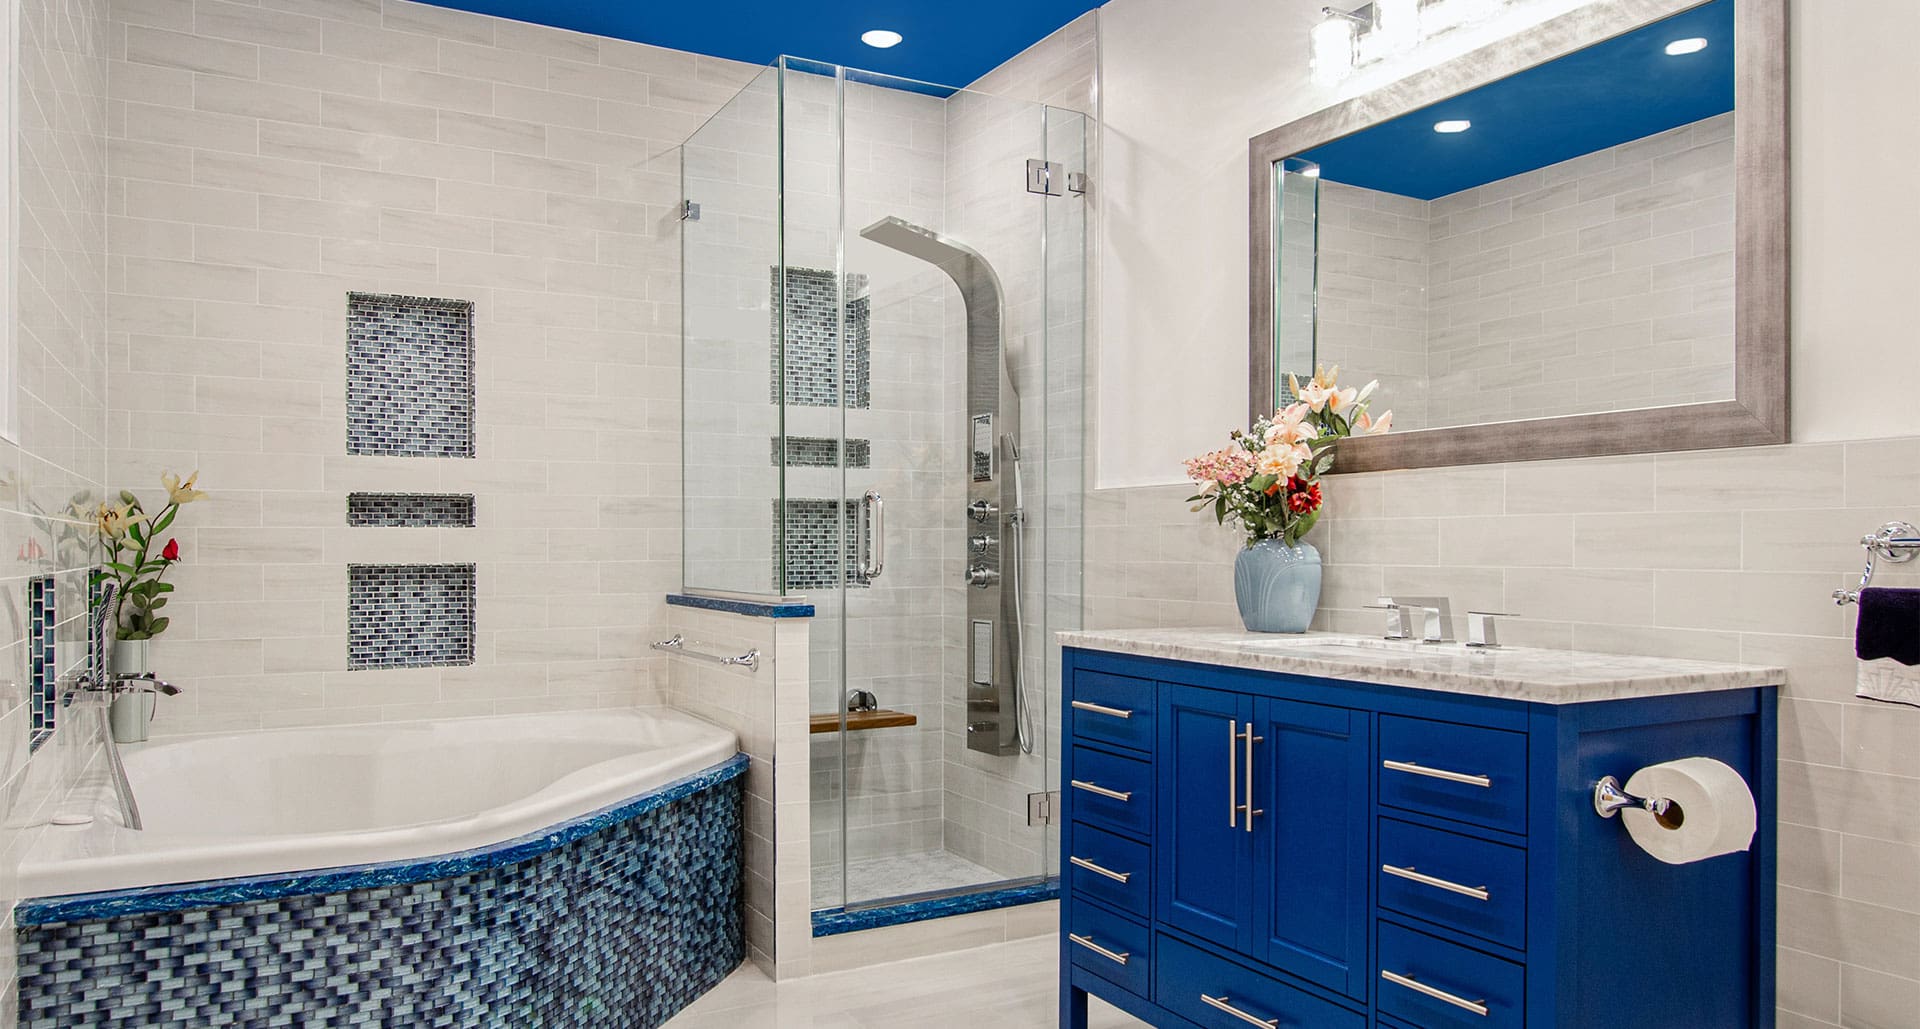 A bathroom with blue tile and white walls.